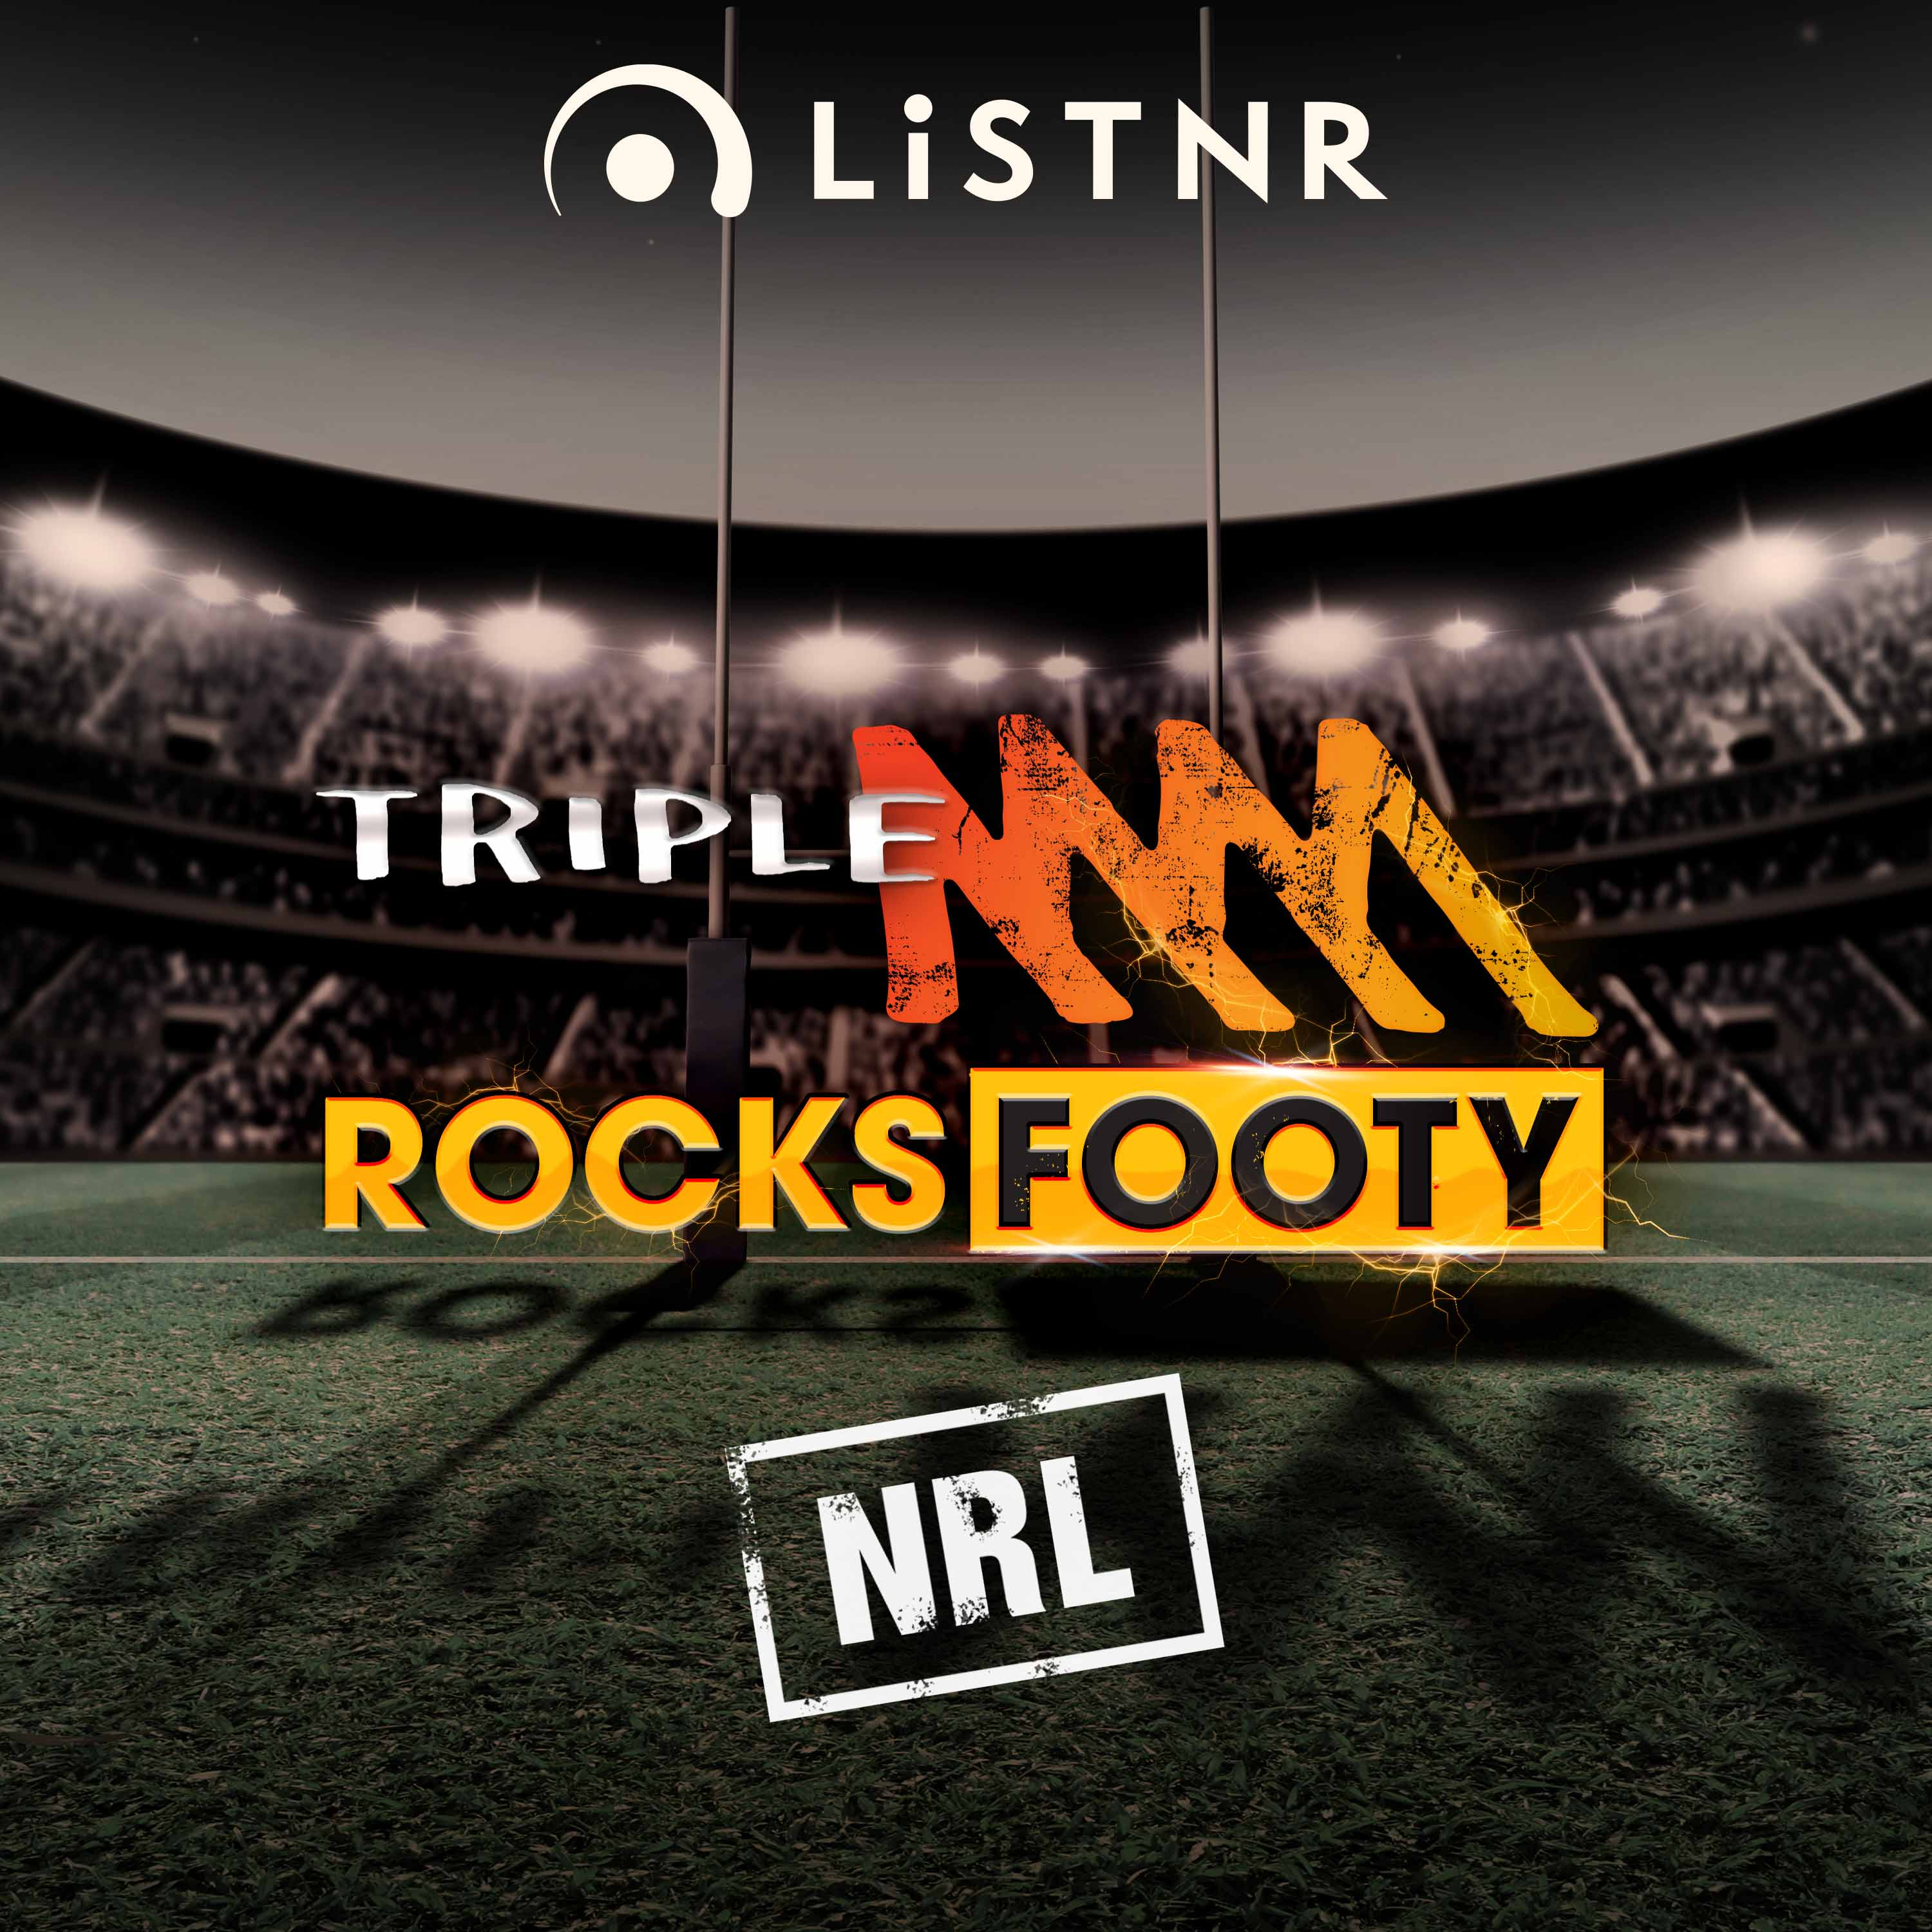 Origin 1 In New Zealand + What's Going On In Canberra? | Triple M NRL's Thursday Night Footy Show